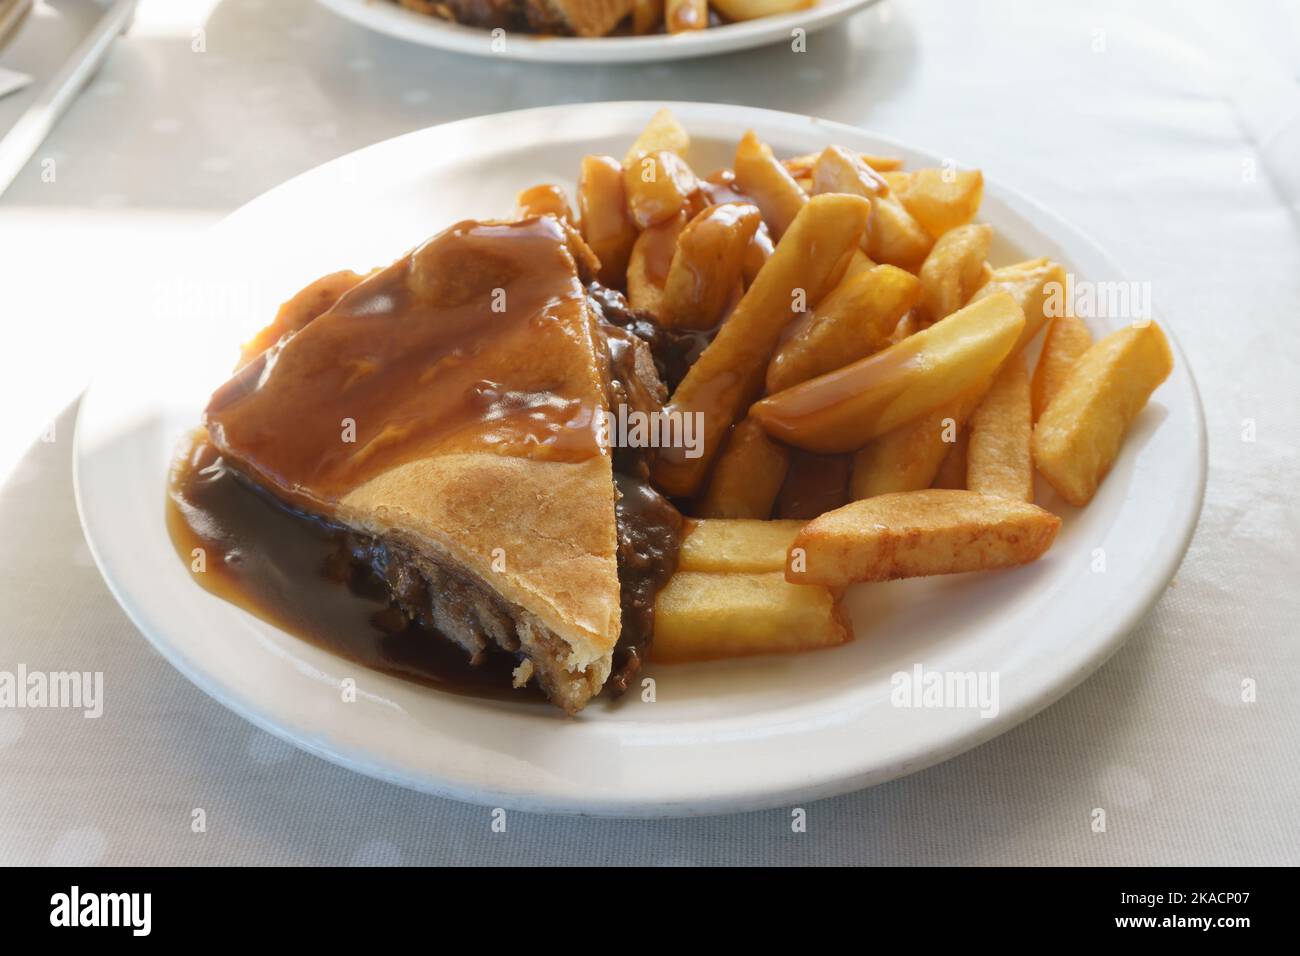 Savoury steak and ale meat pie with potato chips and gravy Stock Photo